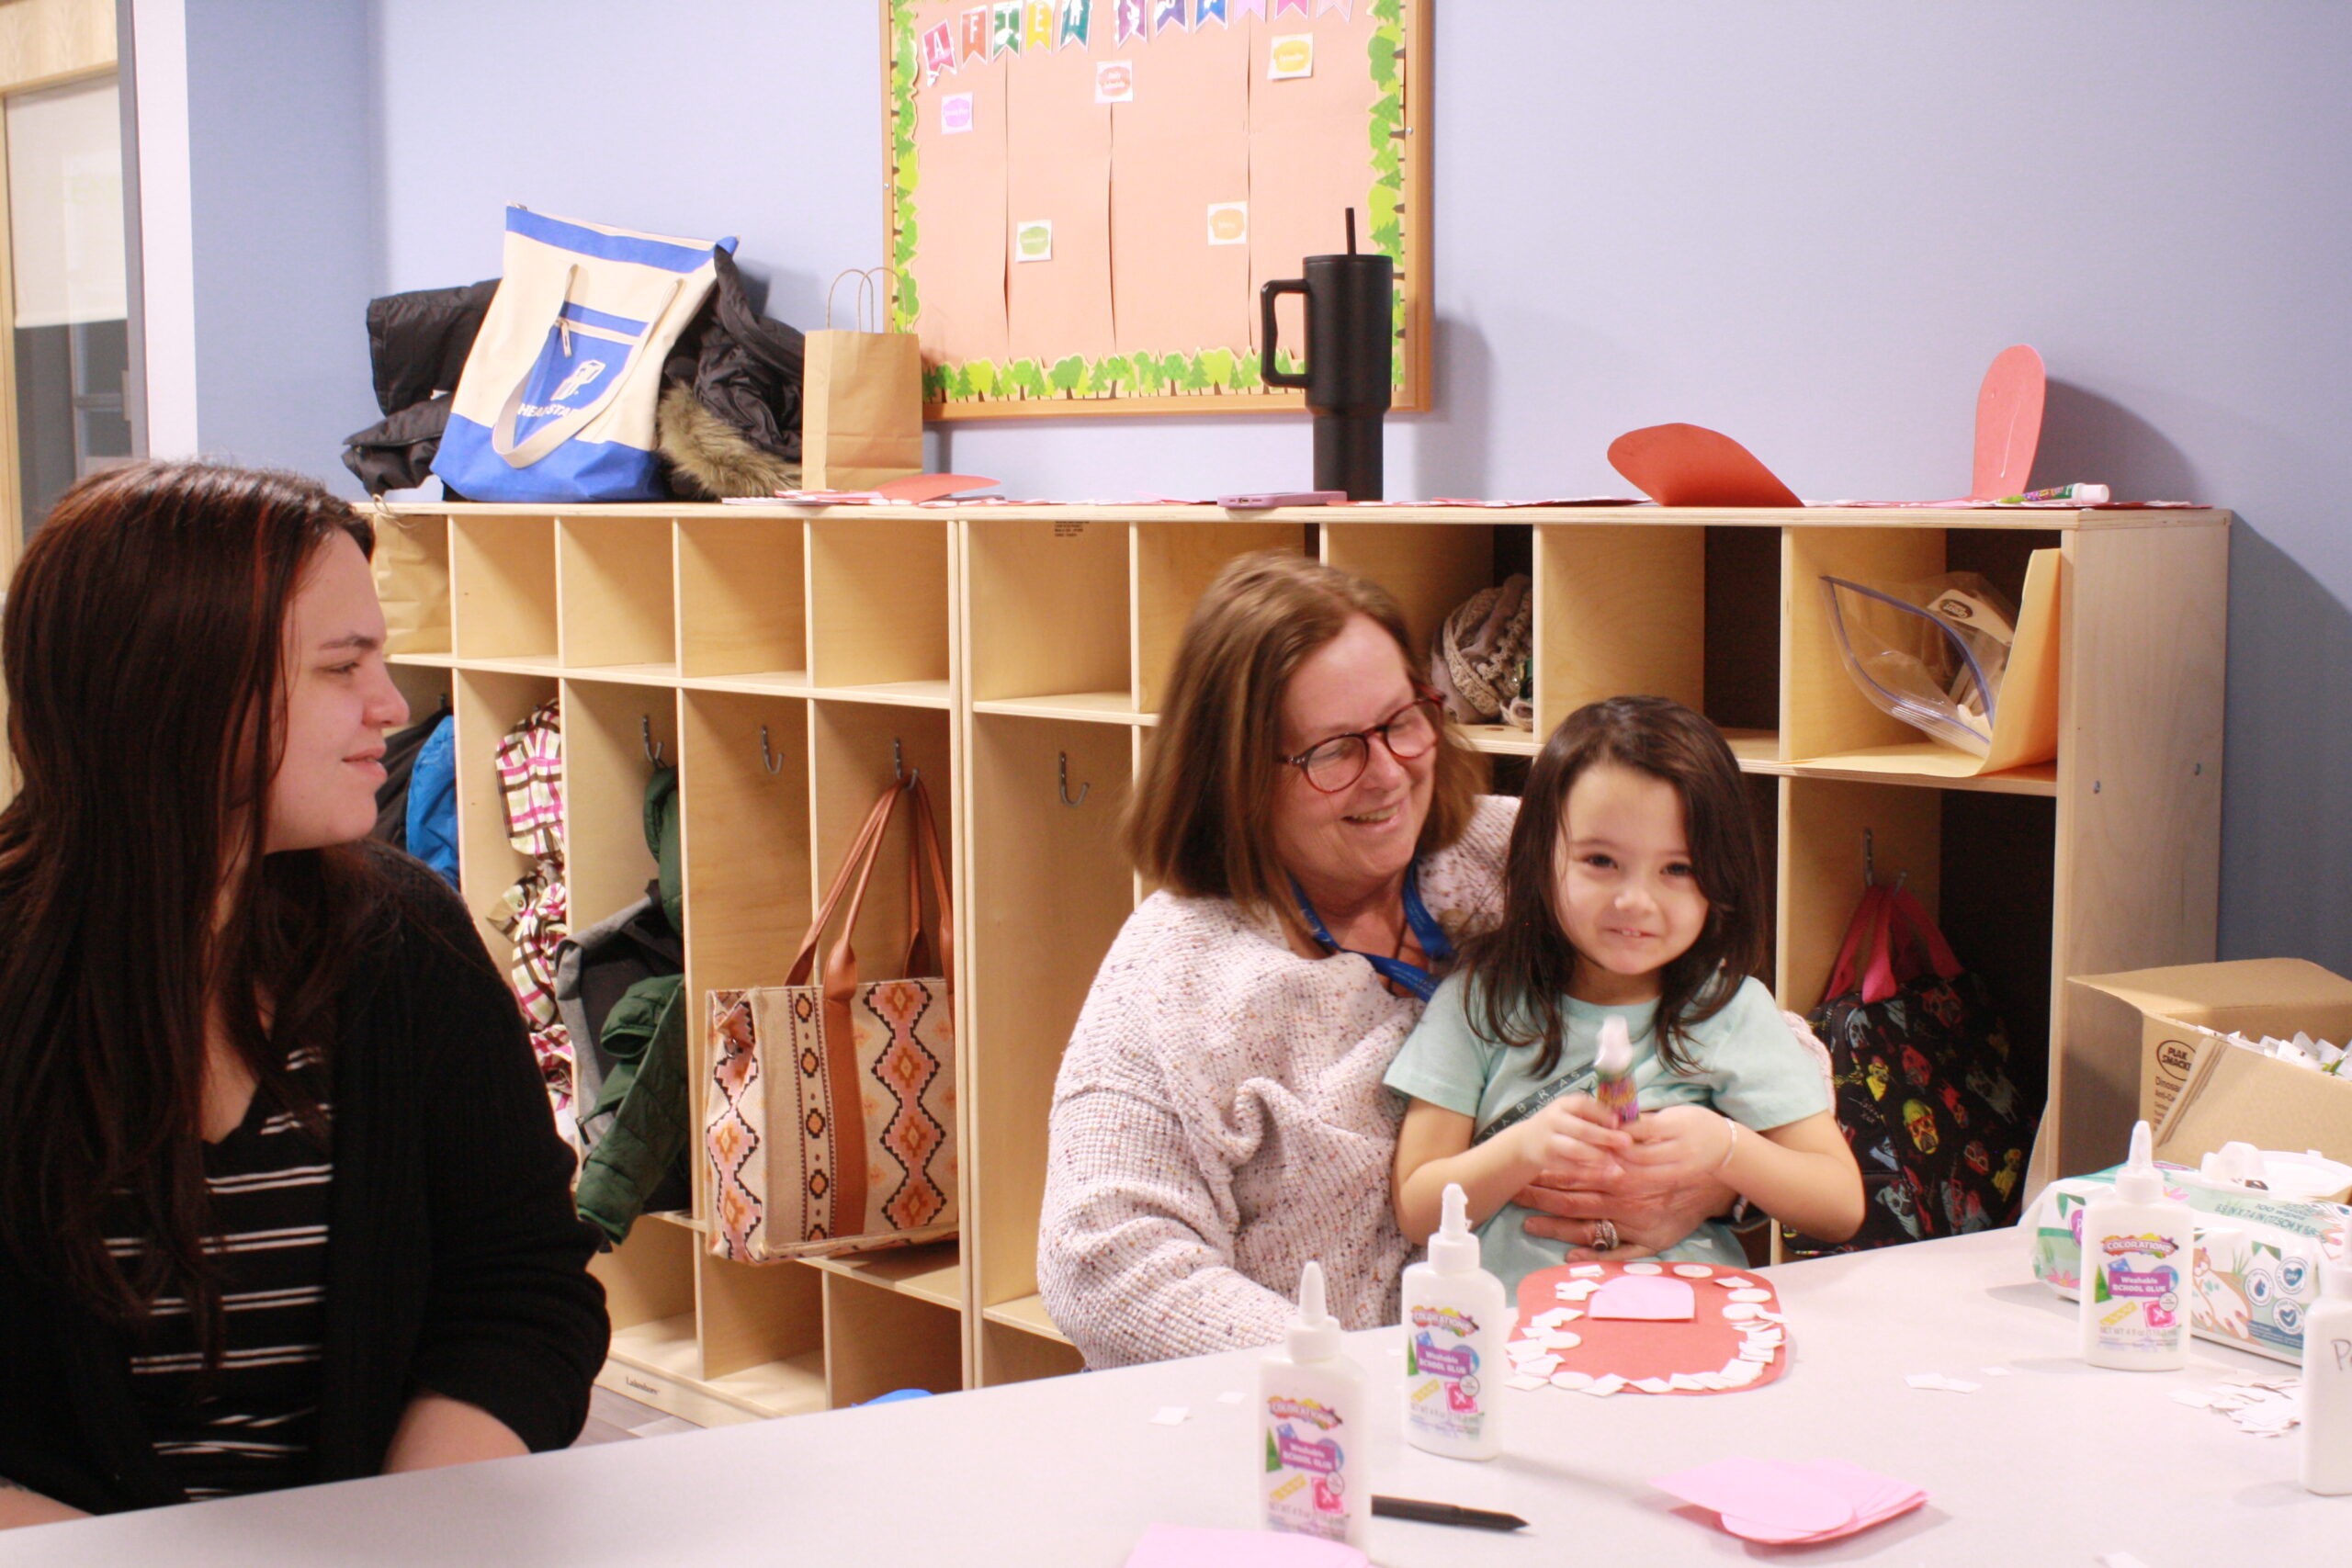 A woman smiles while holding a young girl on her lap. Another woman smiles and looks on. There is a classroom style room in the background with light colored wood cubbies.